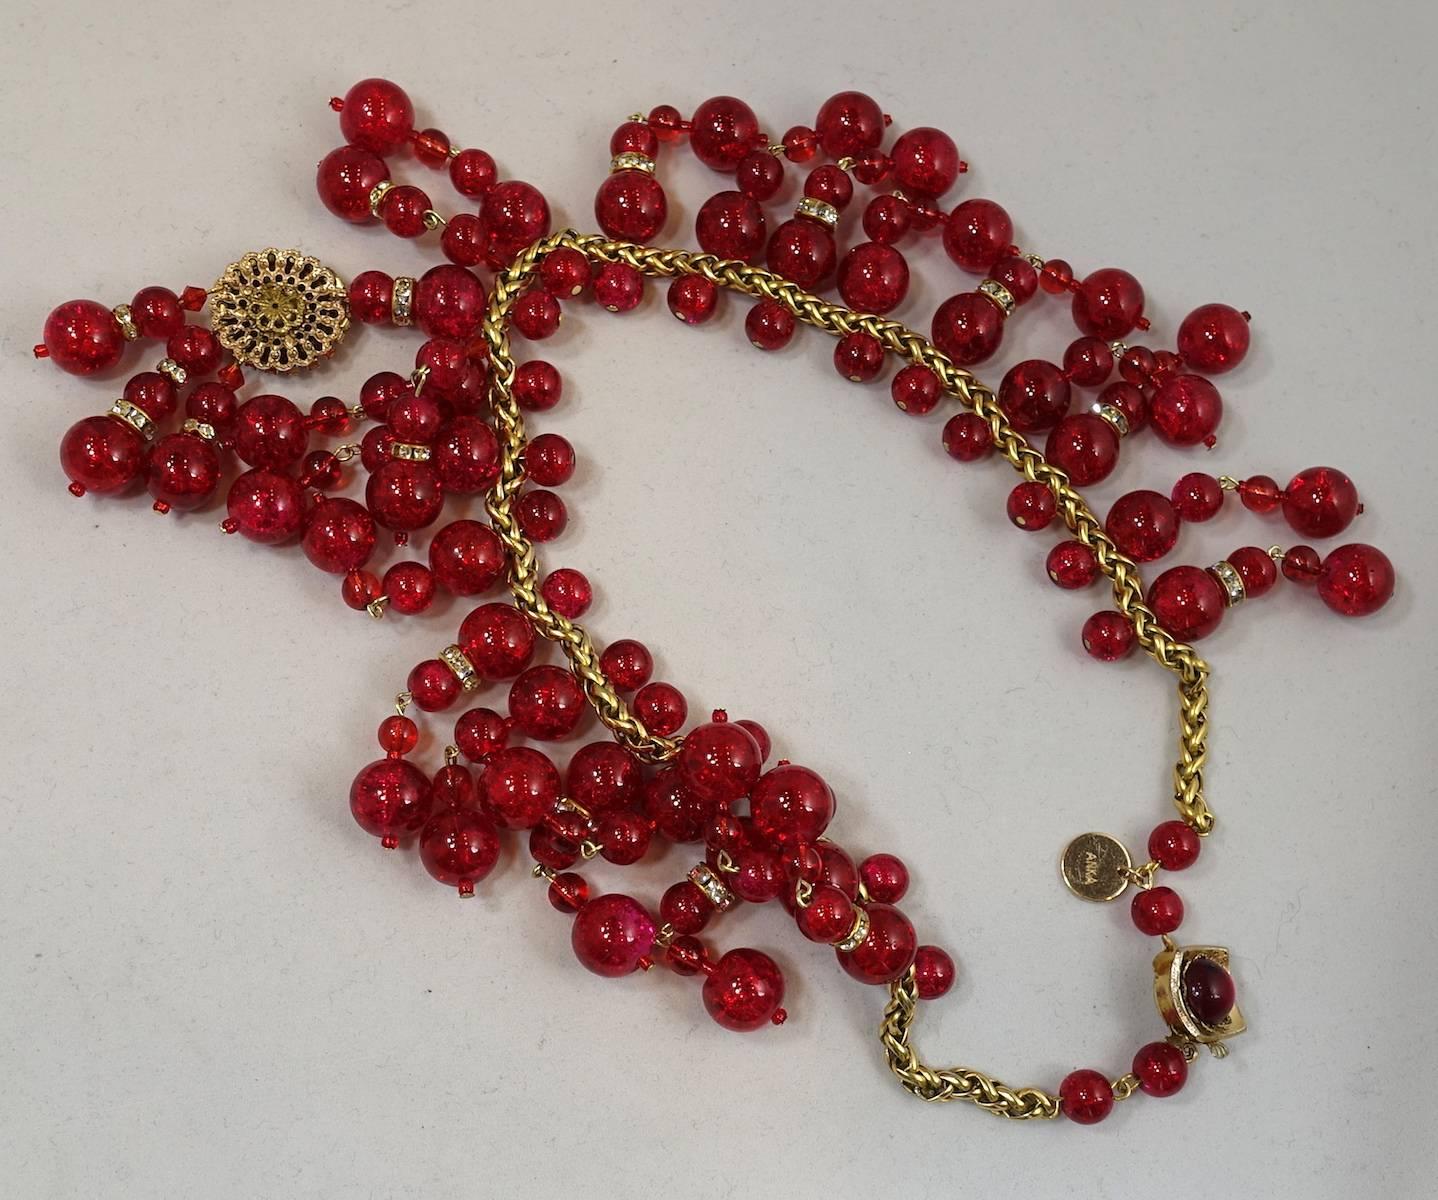 This fabulous bib necklace was designed by Anka.  It has rows of six dangling vintage red glass beads with rhondelle spacers to add an elegant touch. The center has a long red glass drop accentuated with a round ornate beaded glass that is